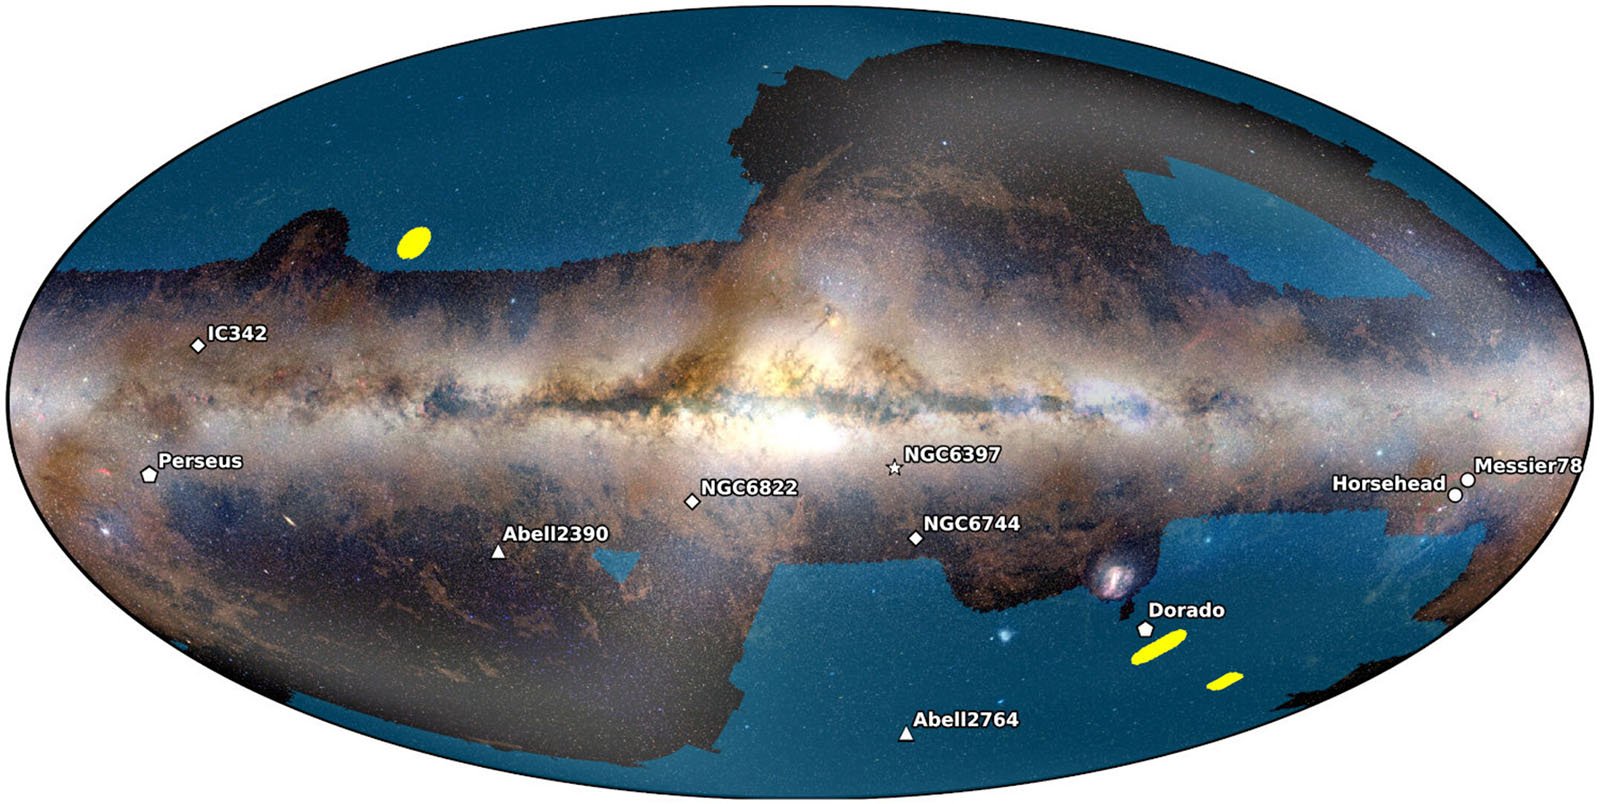 An oval-shaped panoramic image of the night sky showing the Milky Way and various labeled deep-sky objects, including NGC6822, NGC6637, NGC6744, Messier78, Perseus, and others. The image is annotated with bright spots and labels highlighting specific celestial objects.